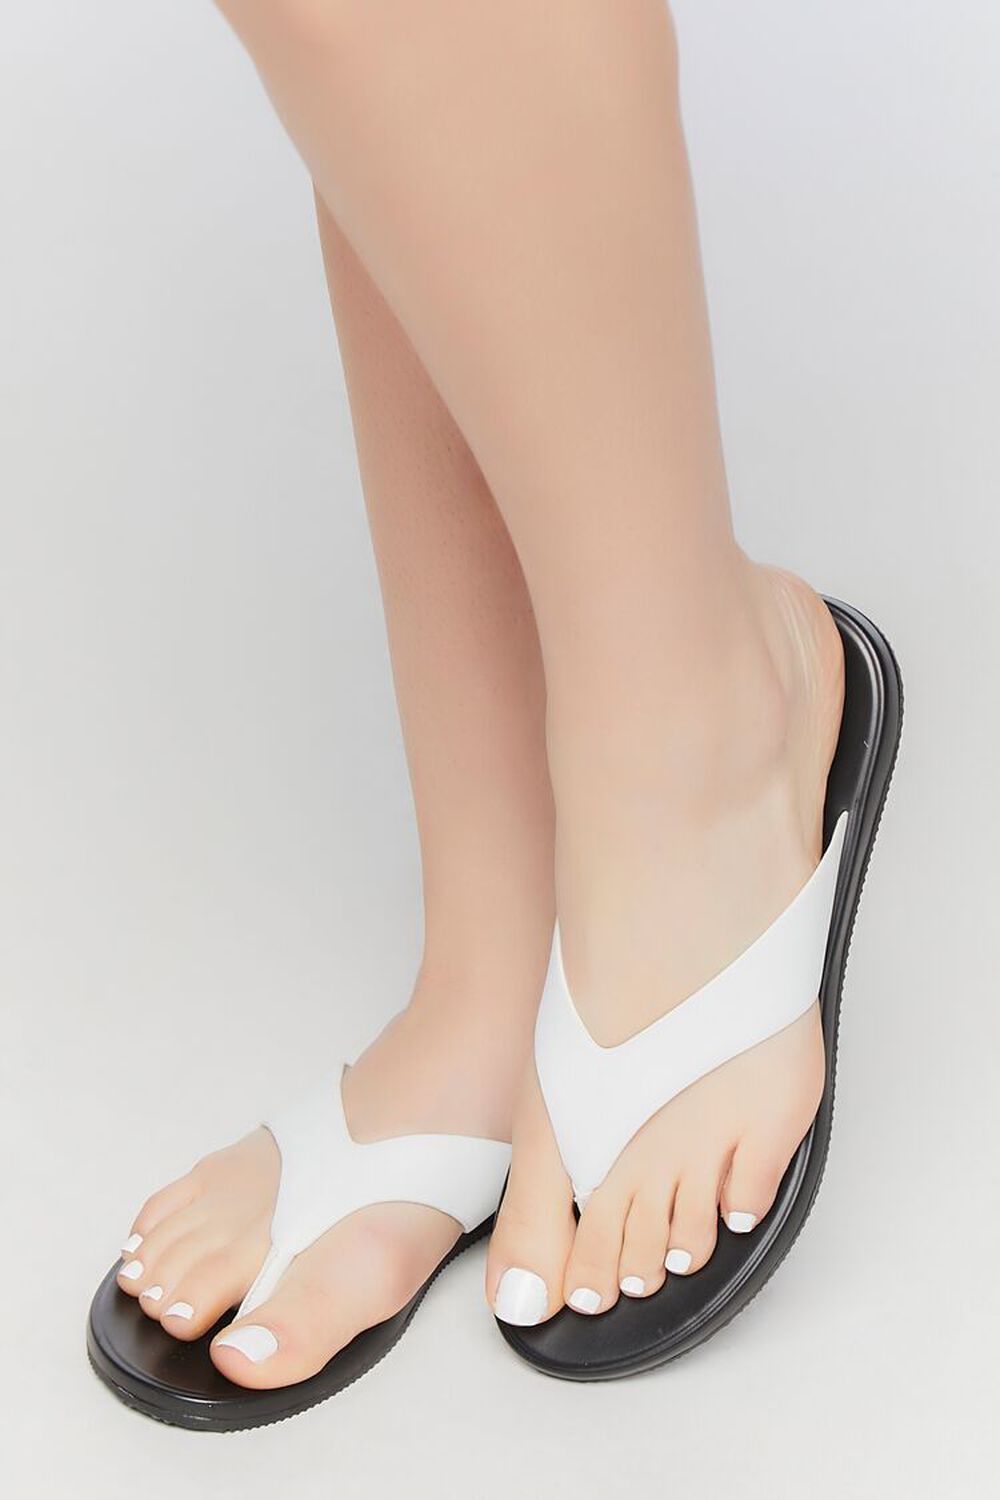 WHITE Faux Leather Thong Sandals, image 1